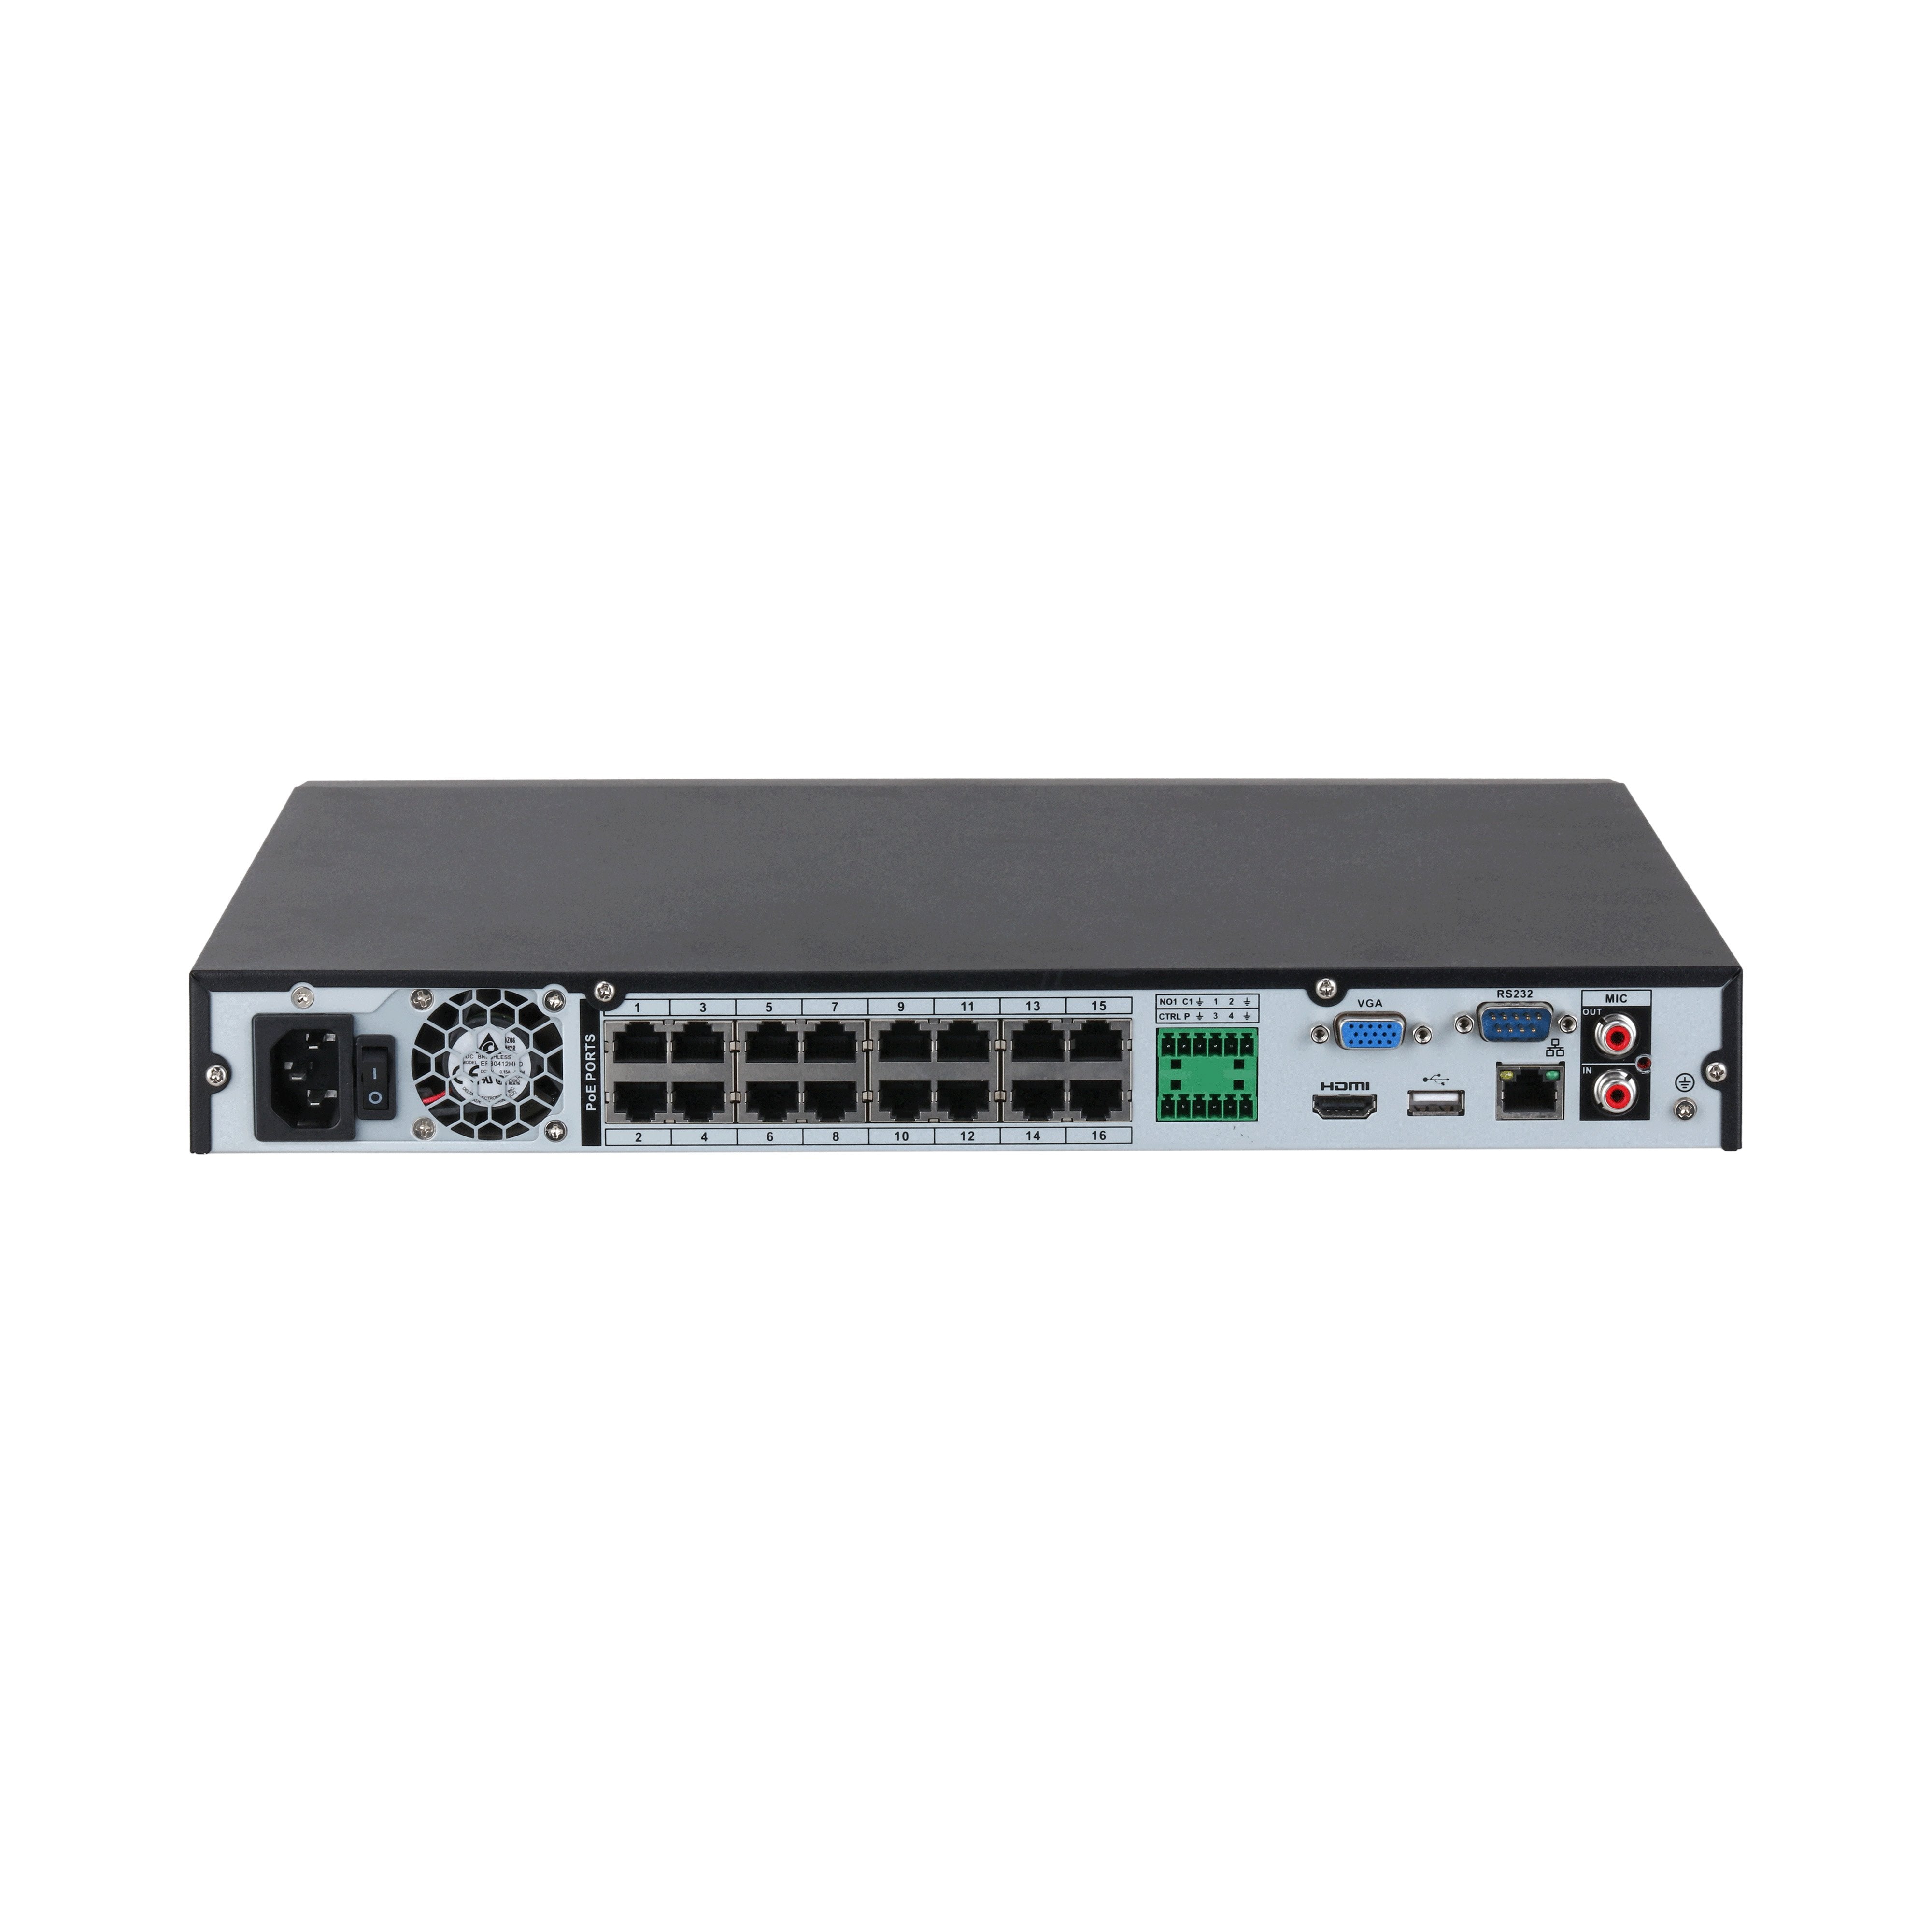 Dahua 16 Channel, WizSense AI Series, 16 x POE, 1RU, 256MB (184MB With AI Function Enabled), 1 x Gigabit NIC, 2 x HDD **NO HDD INSTALLED**